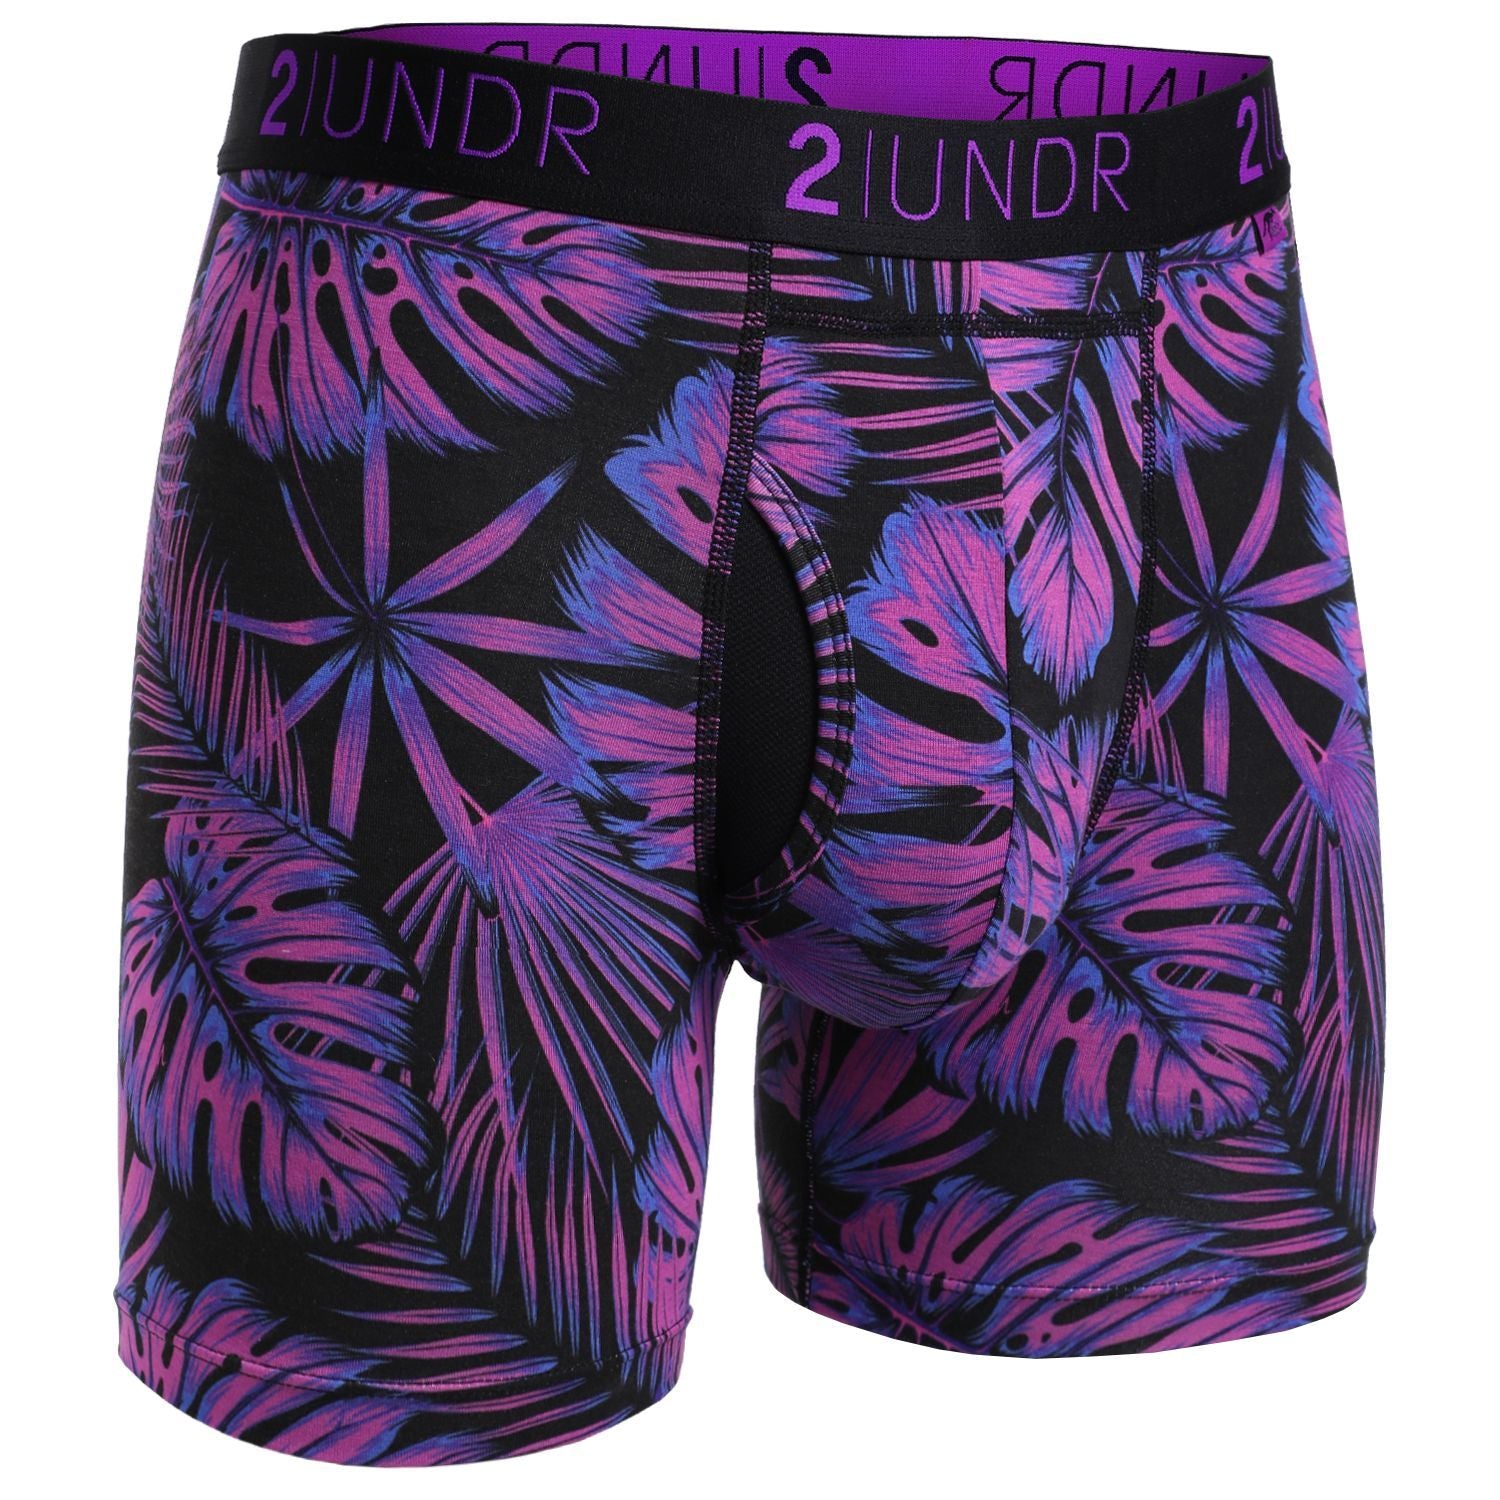 2UNDR - Printed Swing Shift Boxers Ultra Violet